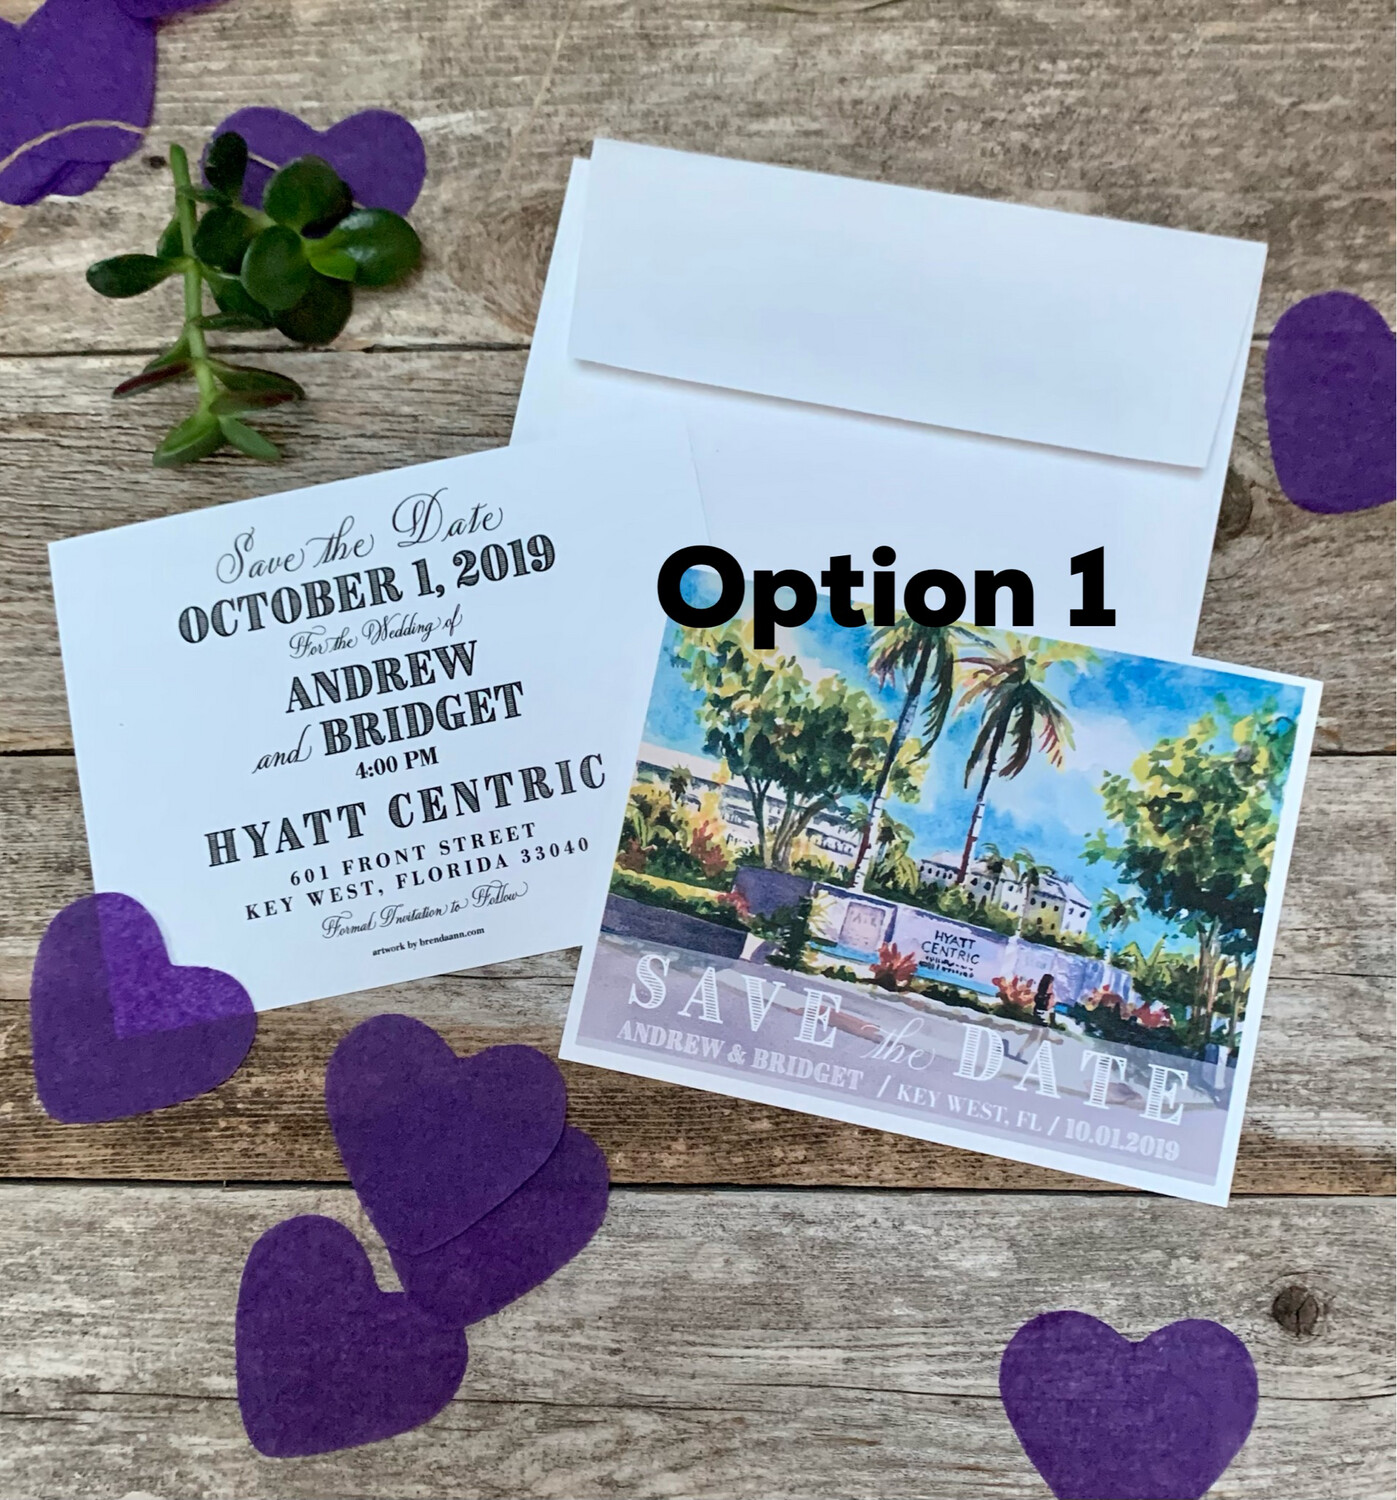 Hyatt Centric Key West Watercolor Wedding Save the Date Cards